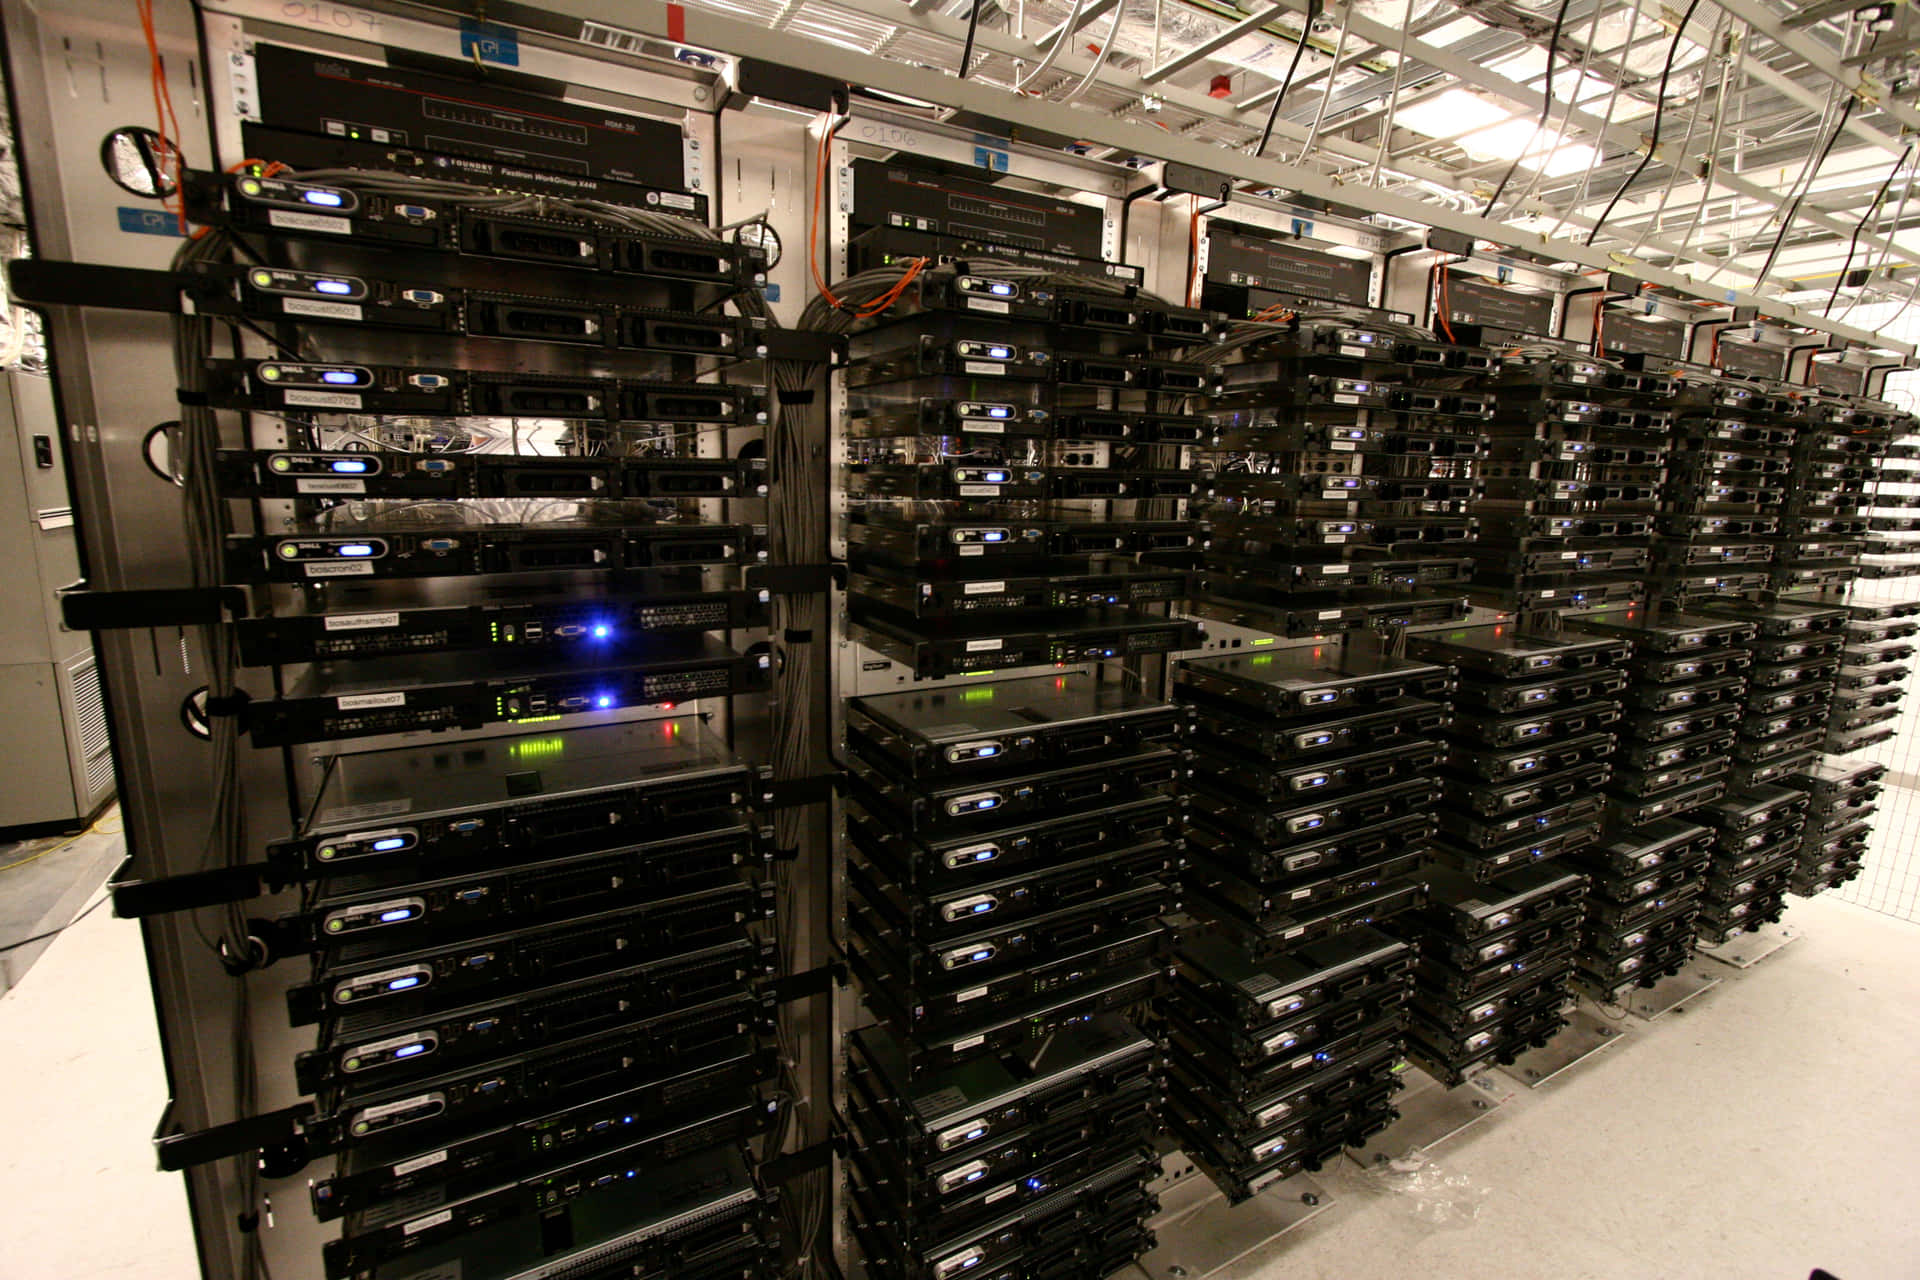 A Large Room With Many Servers